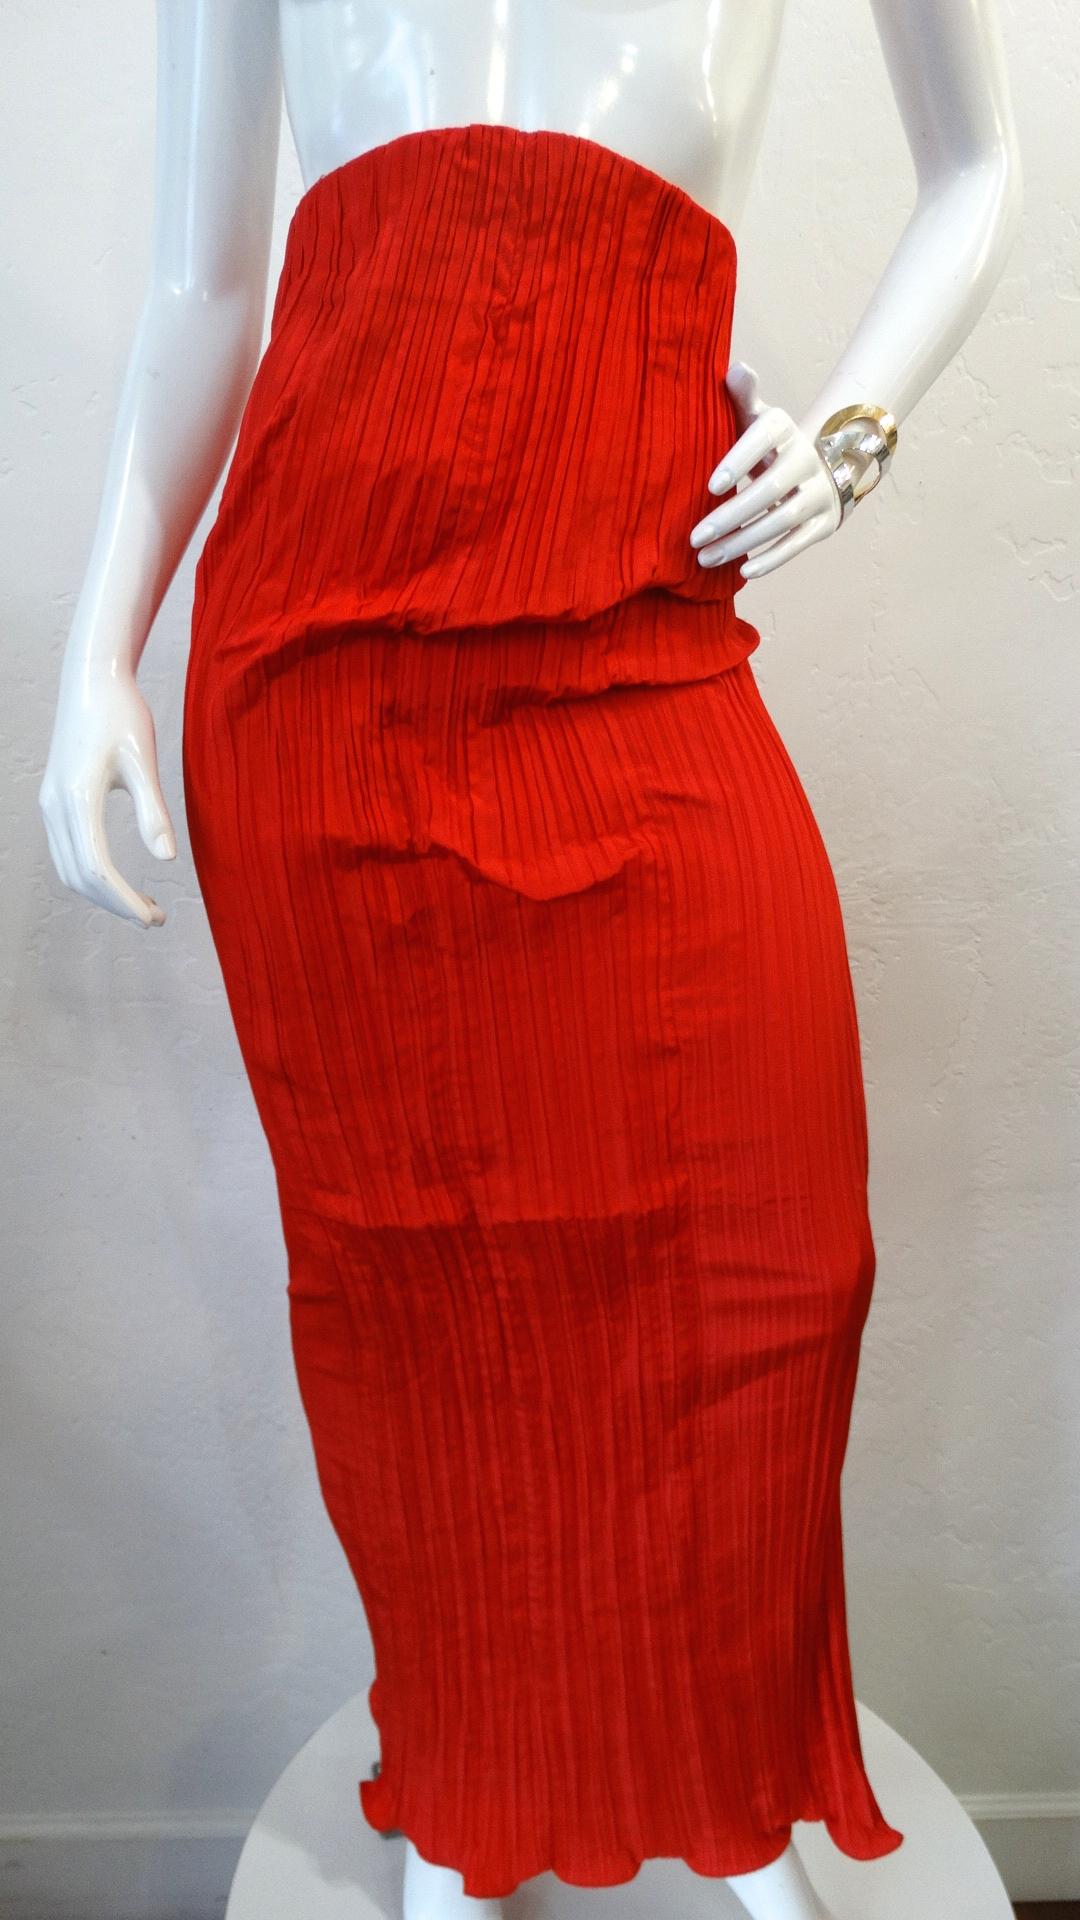 Make A Statement With This Amazing Piece! Circa late 1980s, this Bernard Perris couture pleated silk crepe skirt is a vibrant red color and features an arched high waisted top hem. Floor length with a slight ruffled hem and a tonal zipper in the